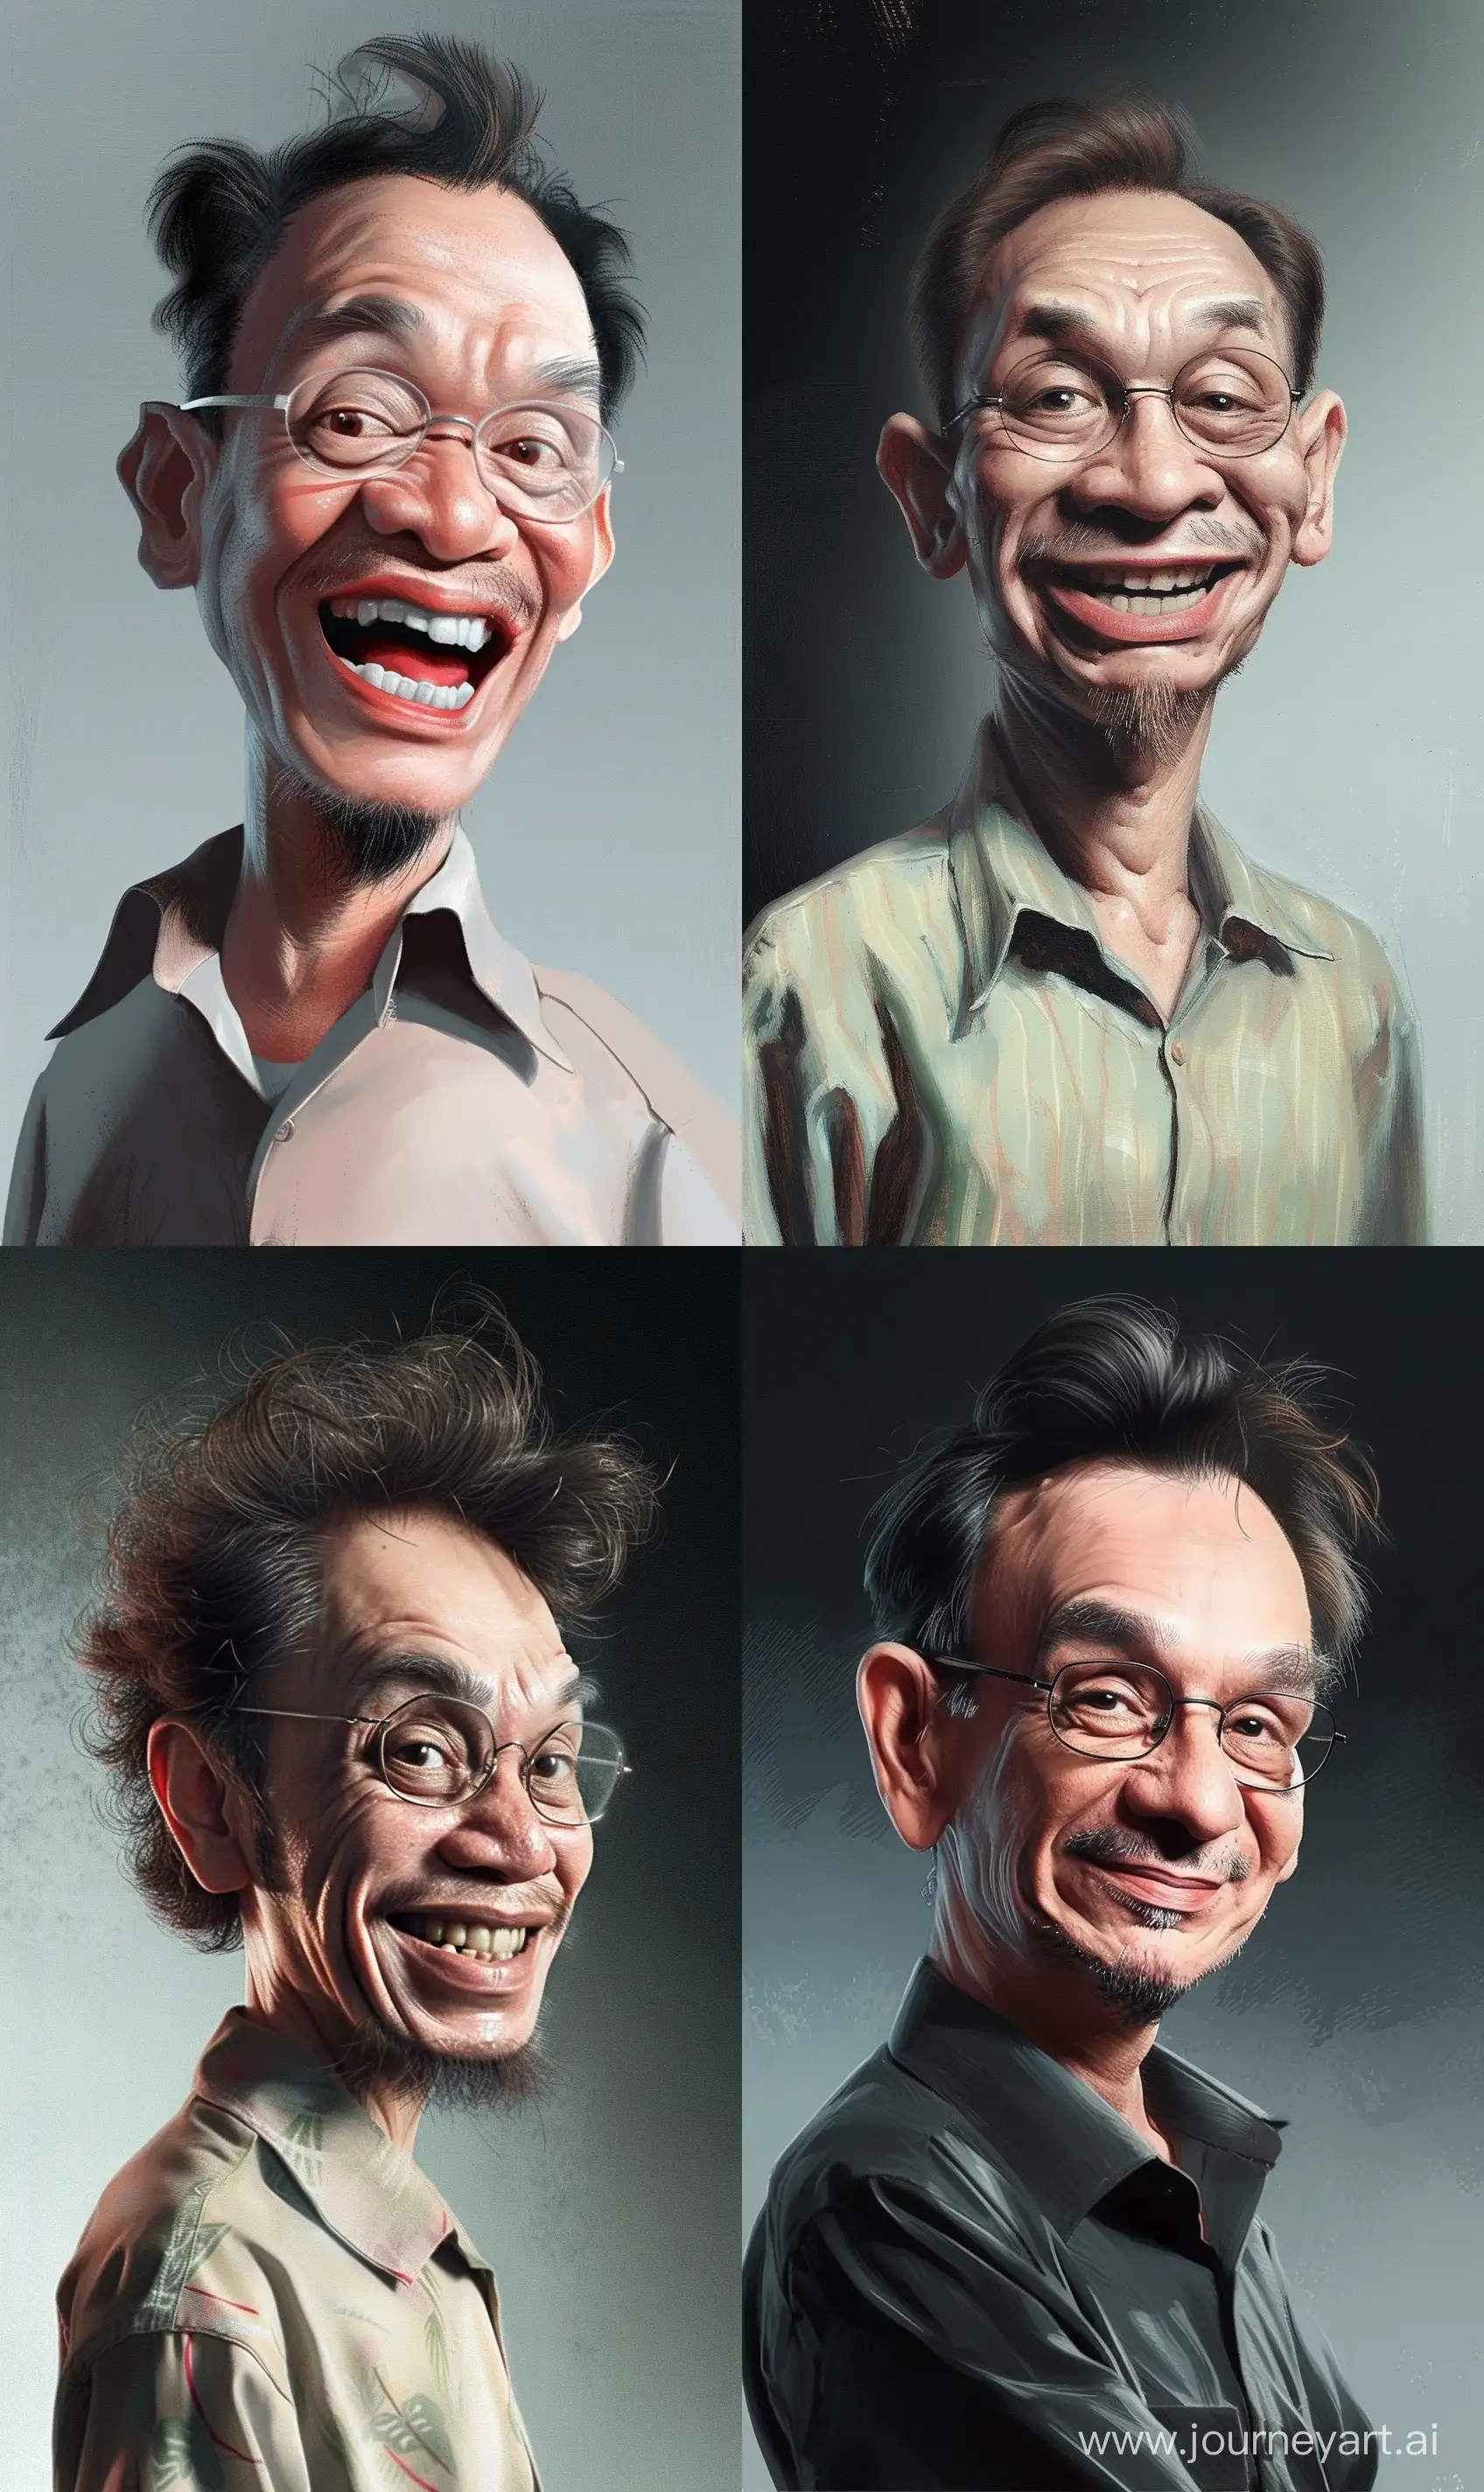 a comically exaggerated portrait of https://encrypted-tbn0.gstatic.com/images?q=tbn:ANd9GcQZFd-6BIj_WIzksiyGNzhykk43CYiOOGMjew&usqp=CAU highlighting humorous and quirky features. Embrace caricature-like elements and playful exaggeration to bring out the humor in the subject's appearance --s 50 --ar 3:5 --style raw --v 6.0